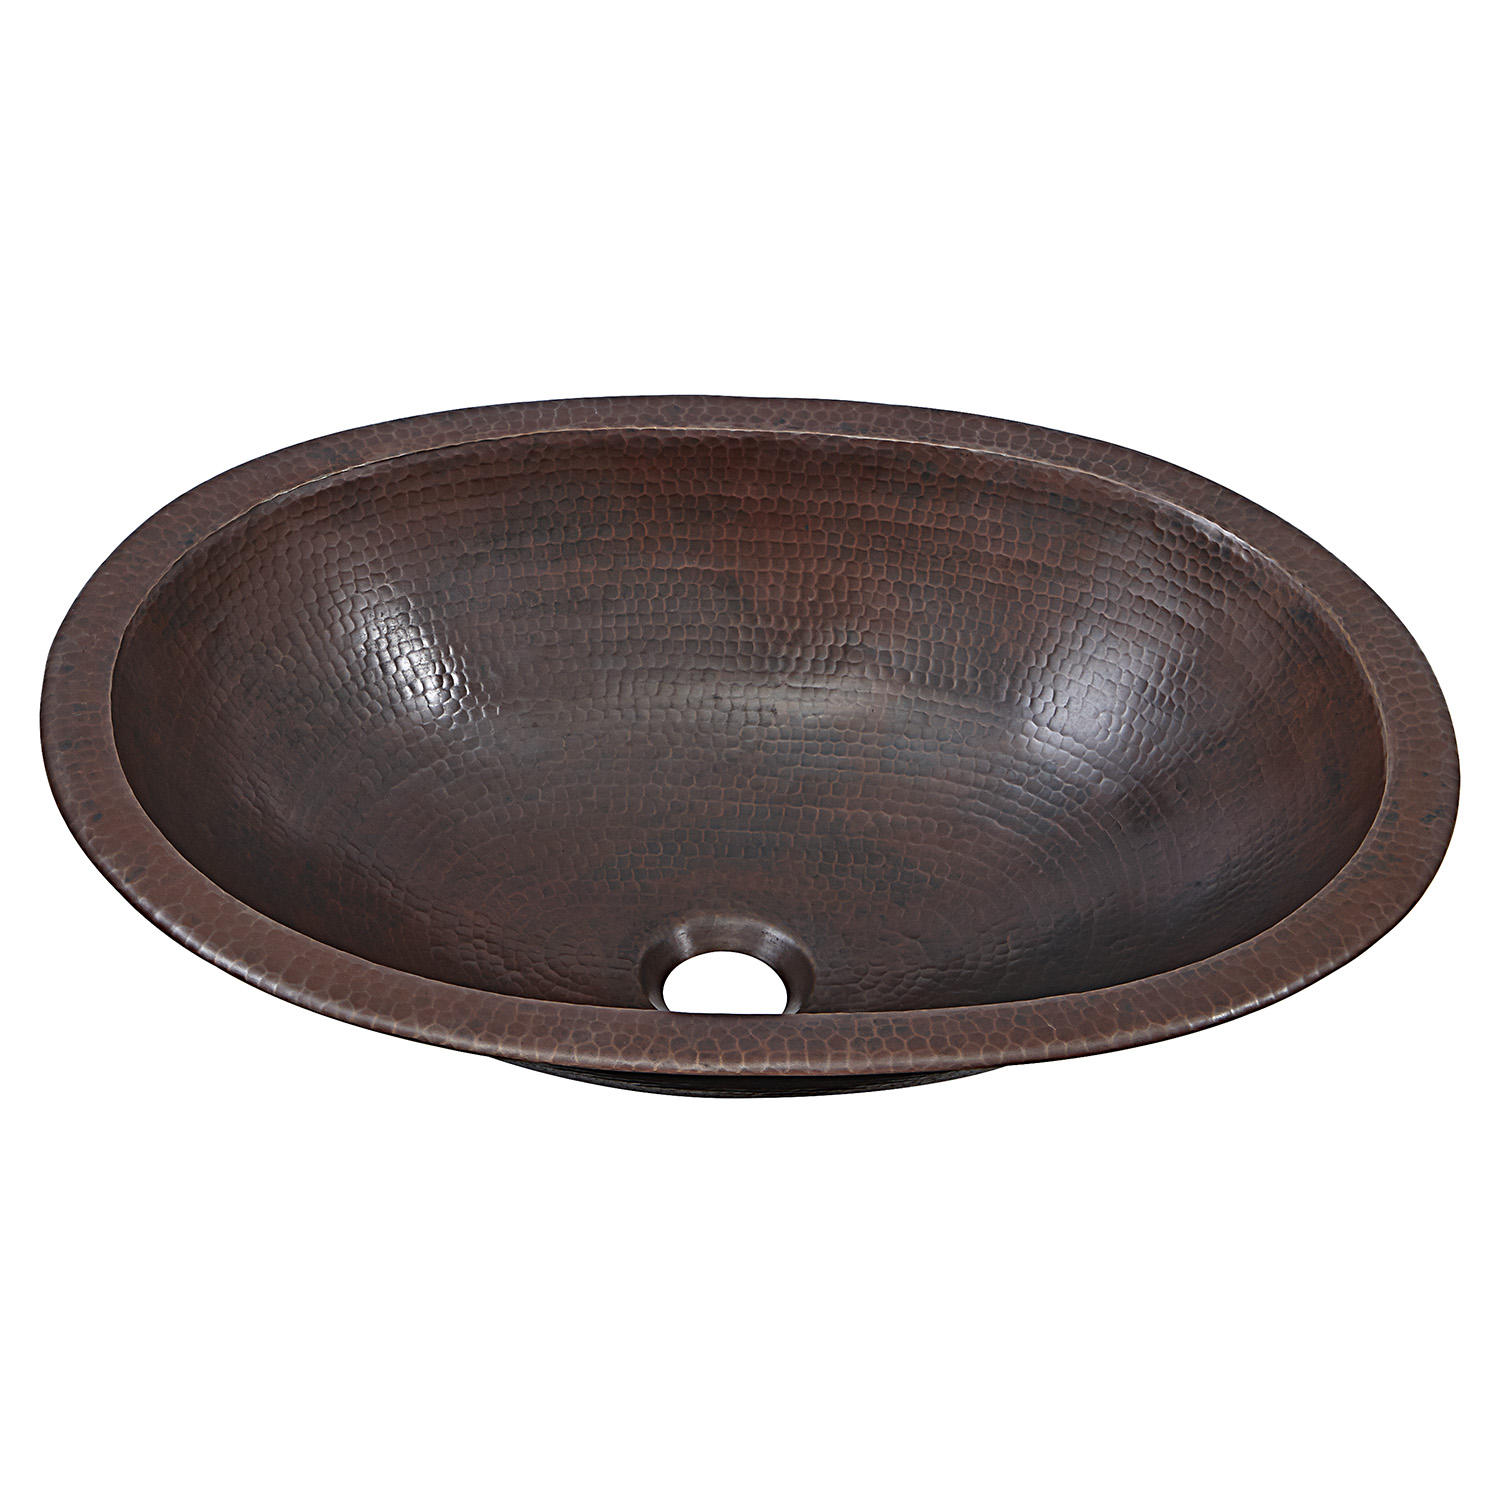 Sinkology SB207-19AG Freud Undermount Oval Handmade Pure Solid Bathroom Sink with Overflow 19-1/4 Aged Copper